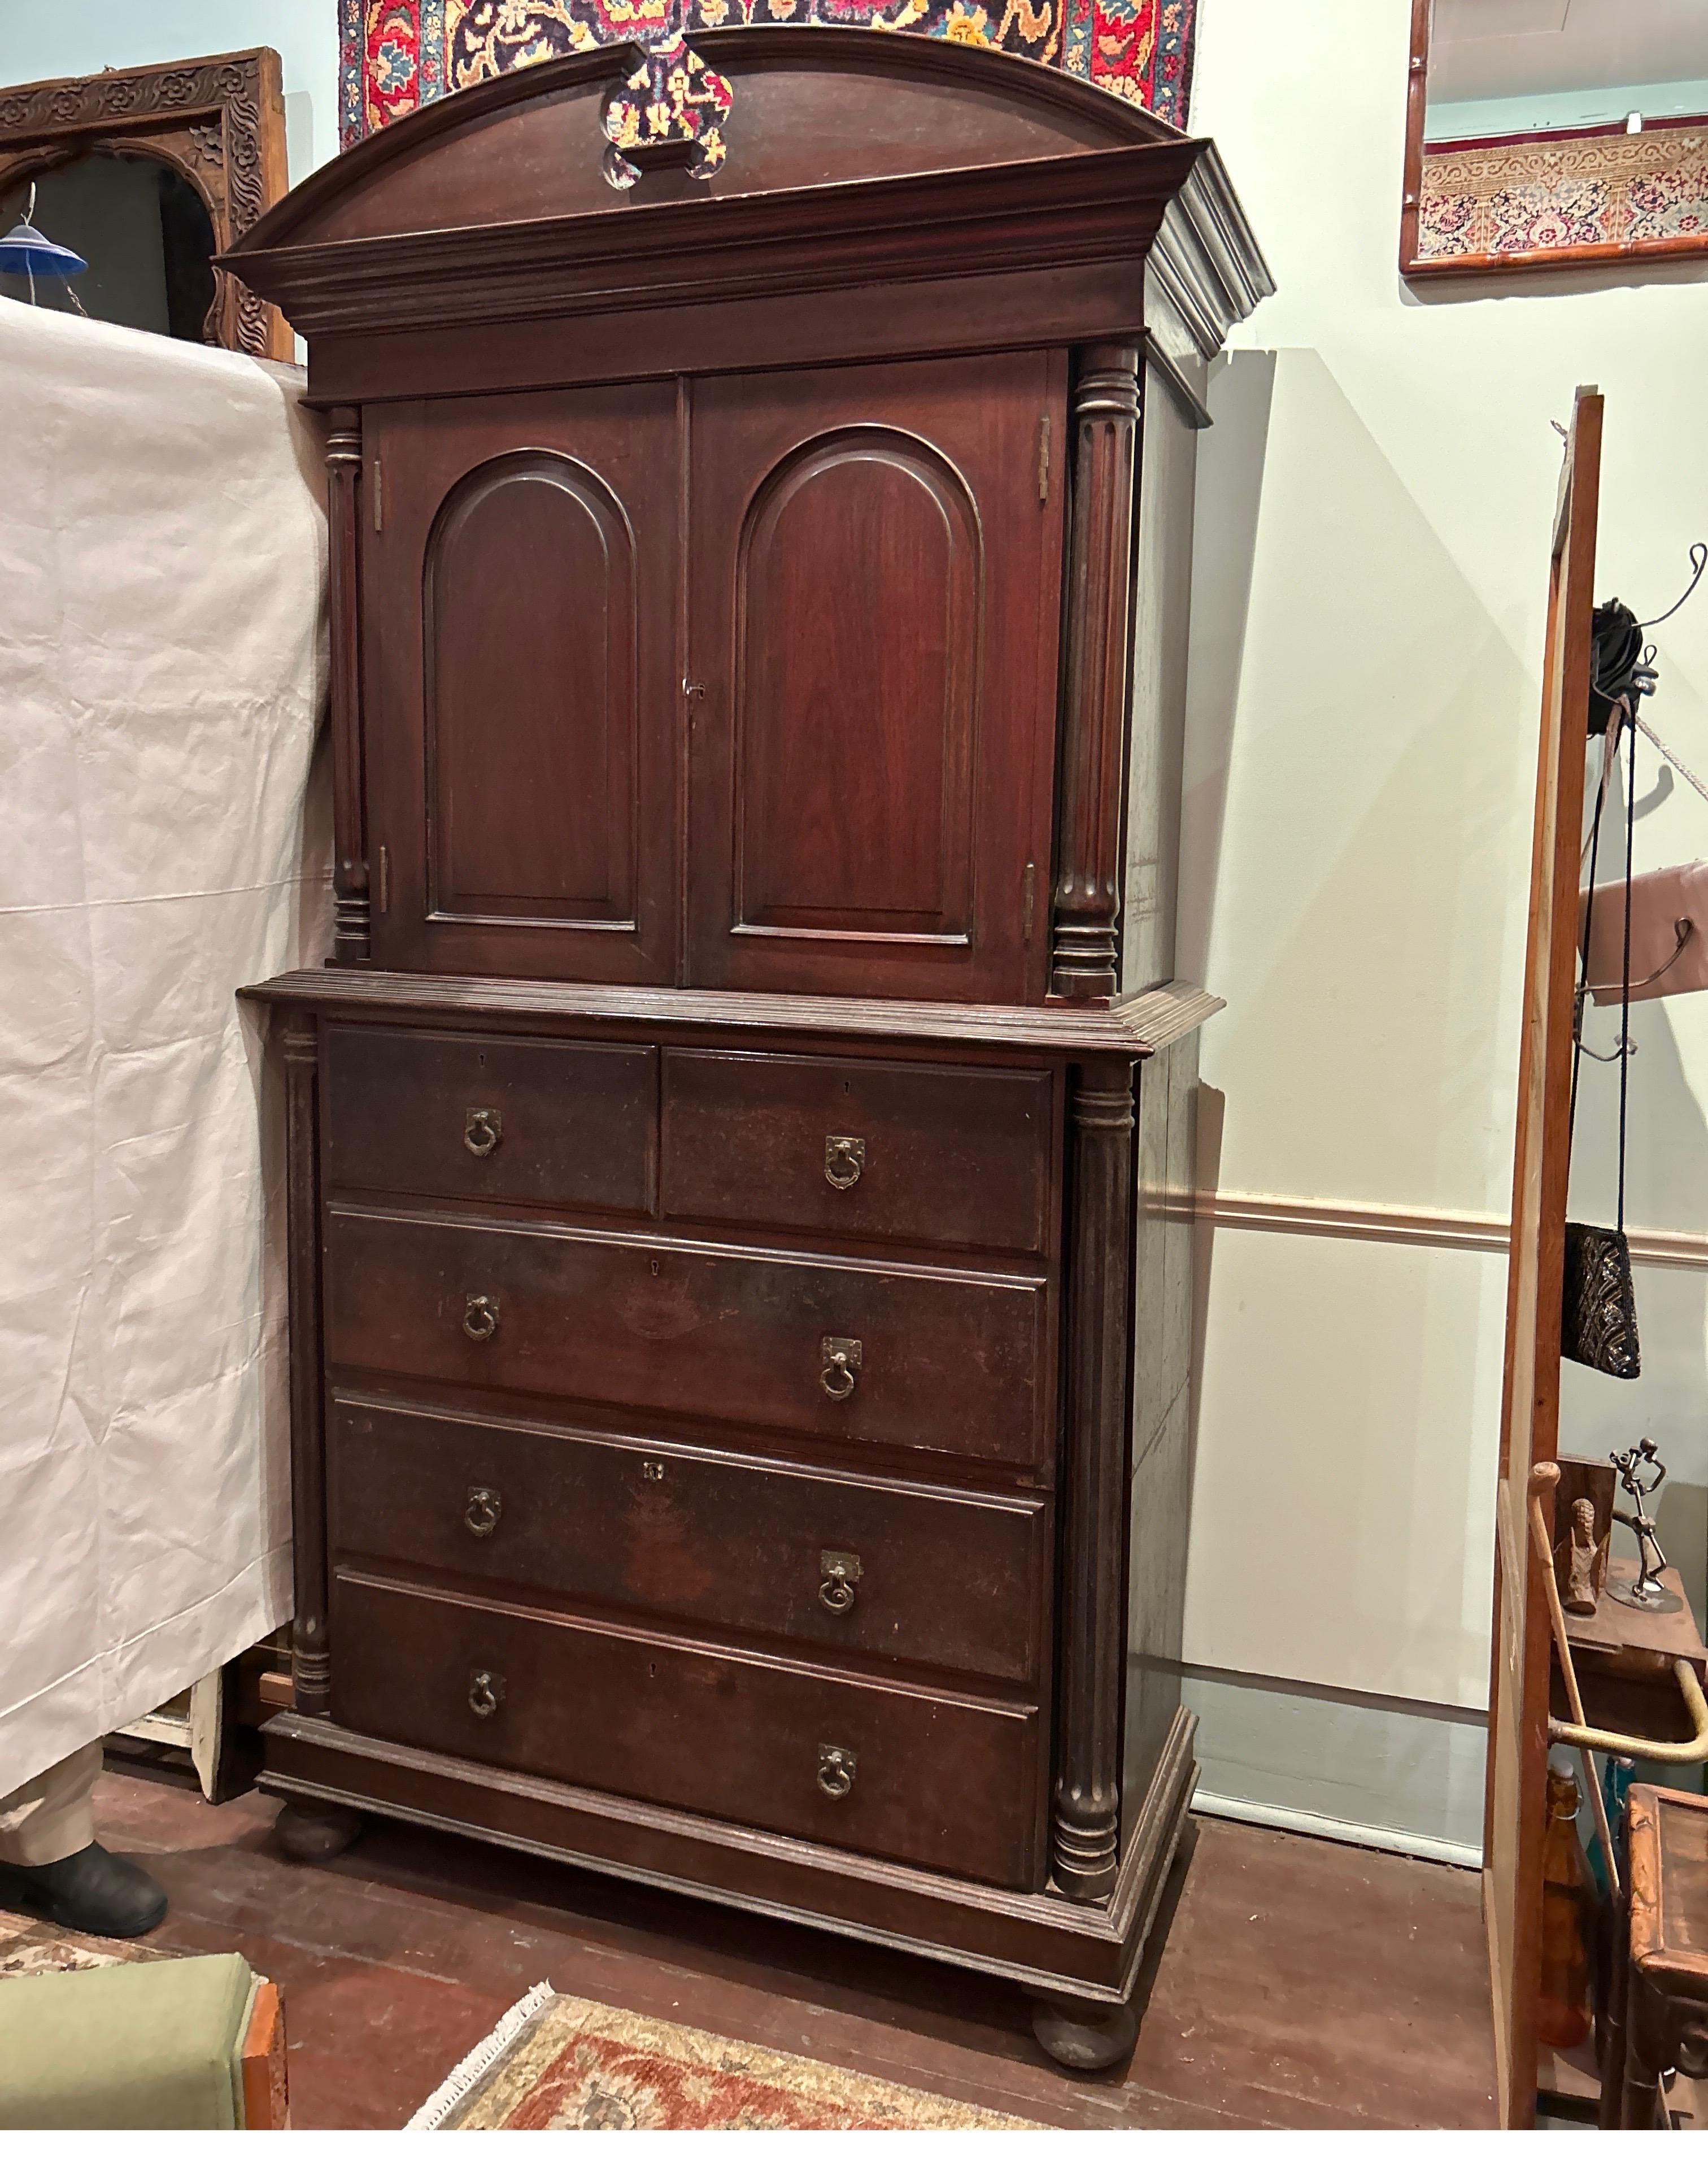 Very rare grand British Colonial Victorian solid Rosewood armoire. Standing at an imposing 7'9